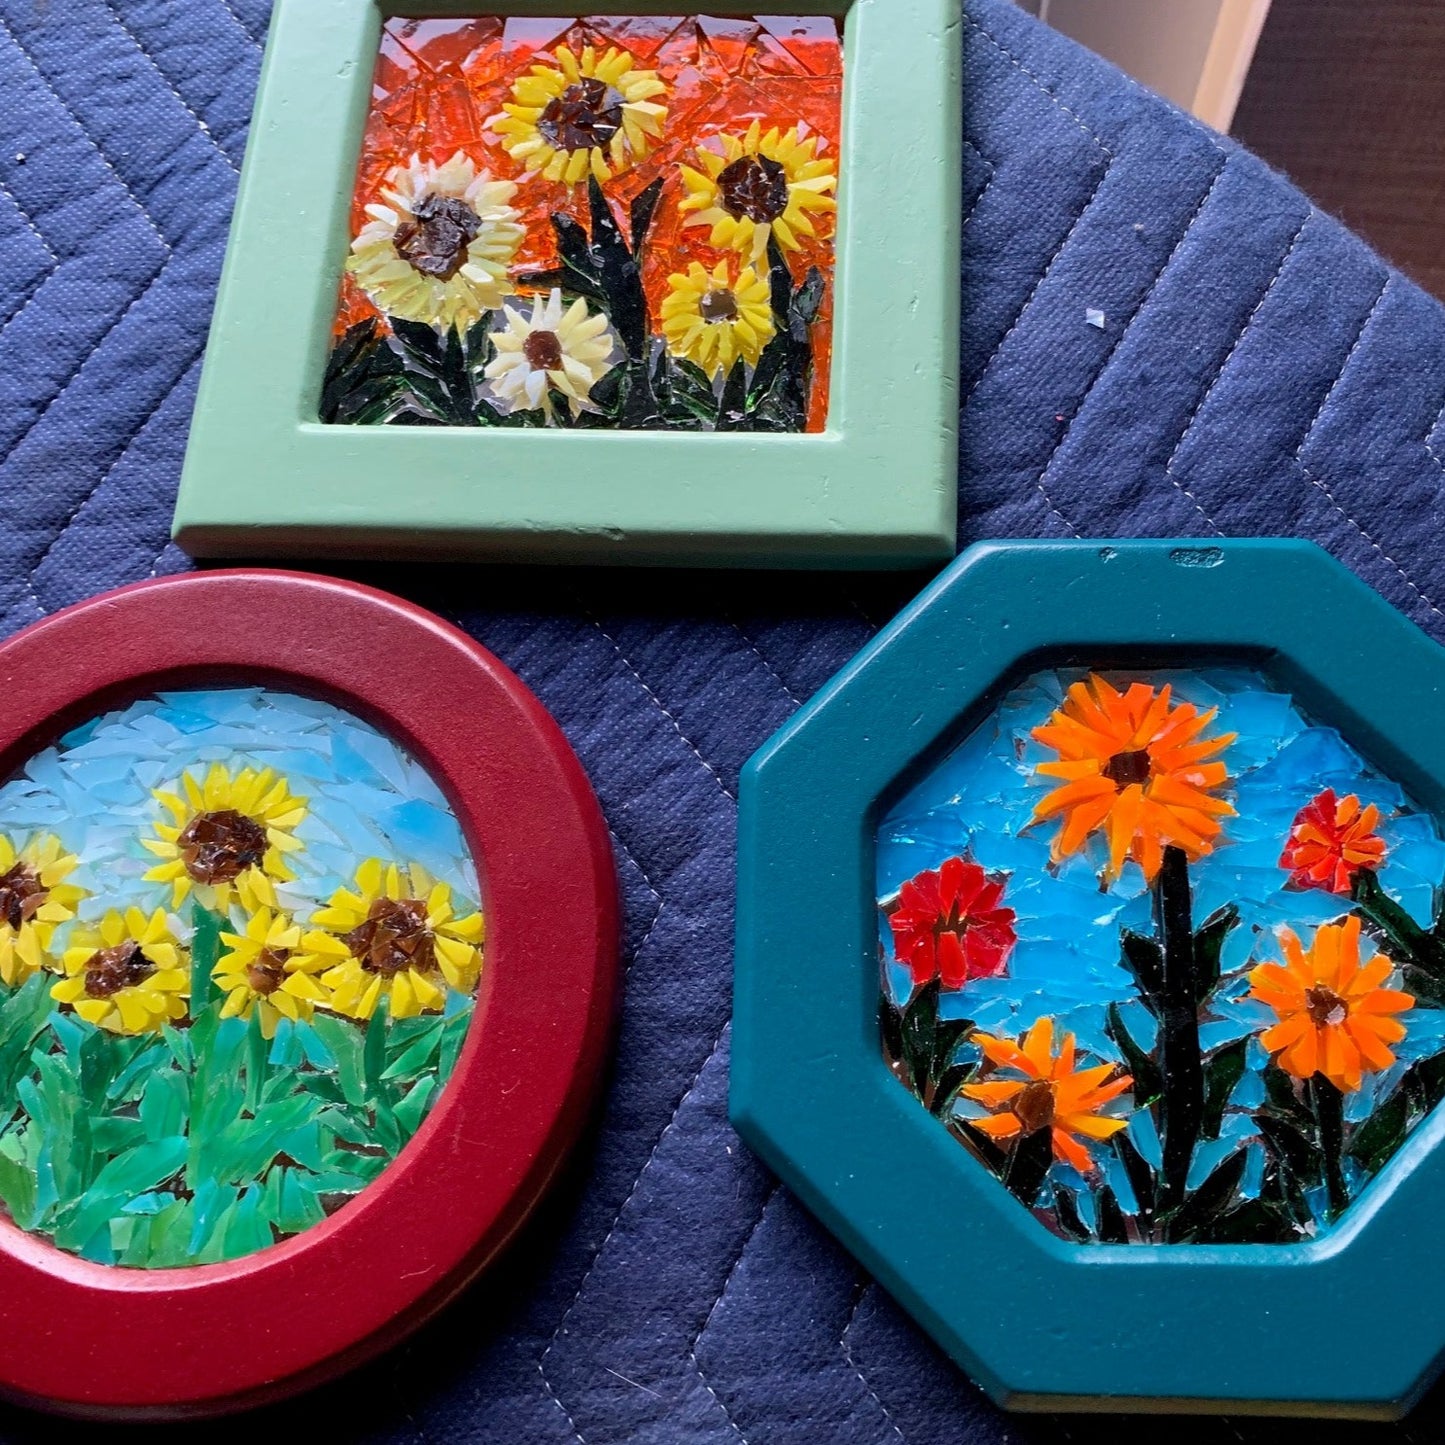 Intro to Mosaics Class with Celeste - April 20th 1:00-3:00pm